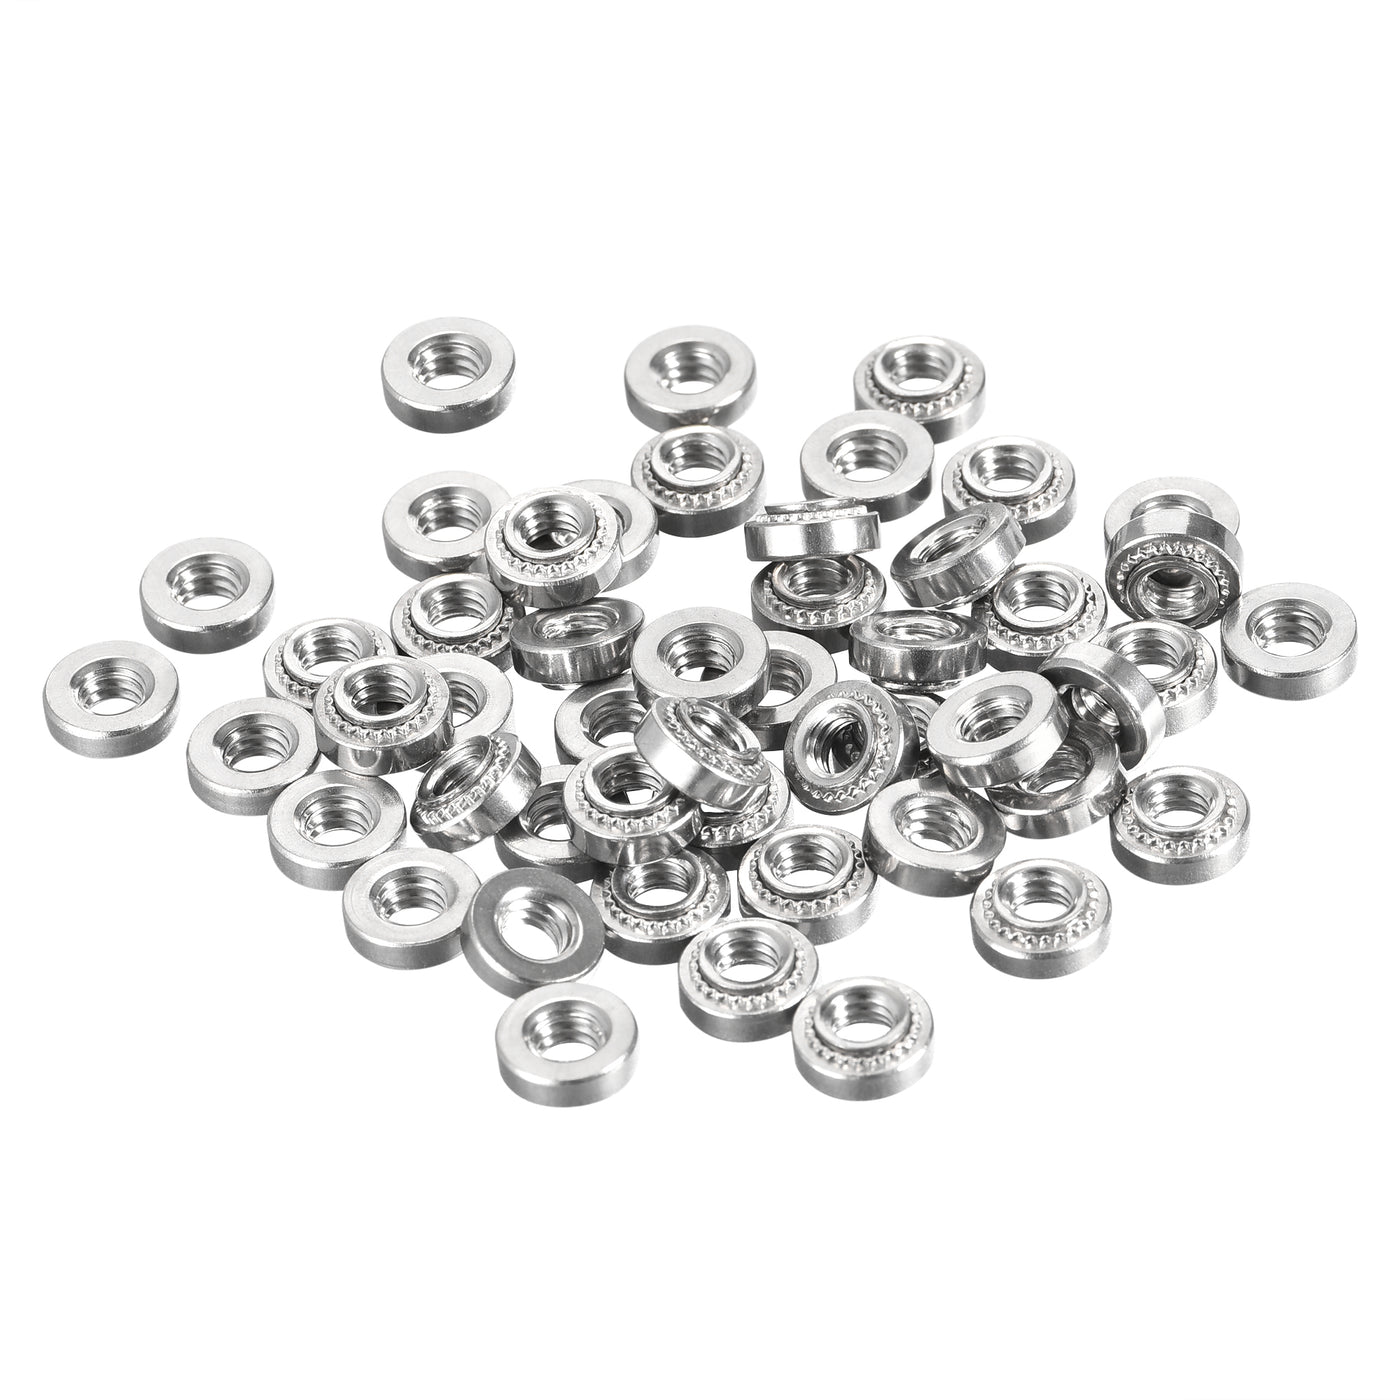 uxcell Uxcell Self -Clinching Nuts,#8-32x3.05mm Stainless Steel Rivet Nut Fastener 50pcs